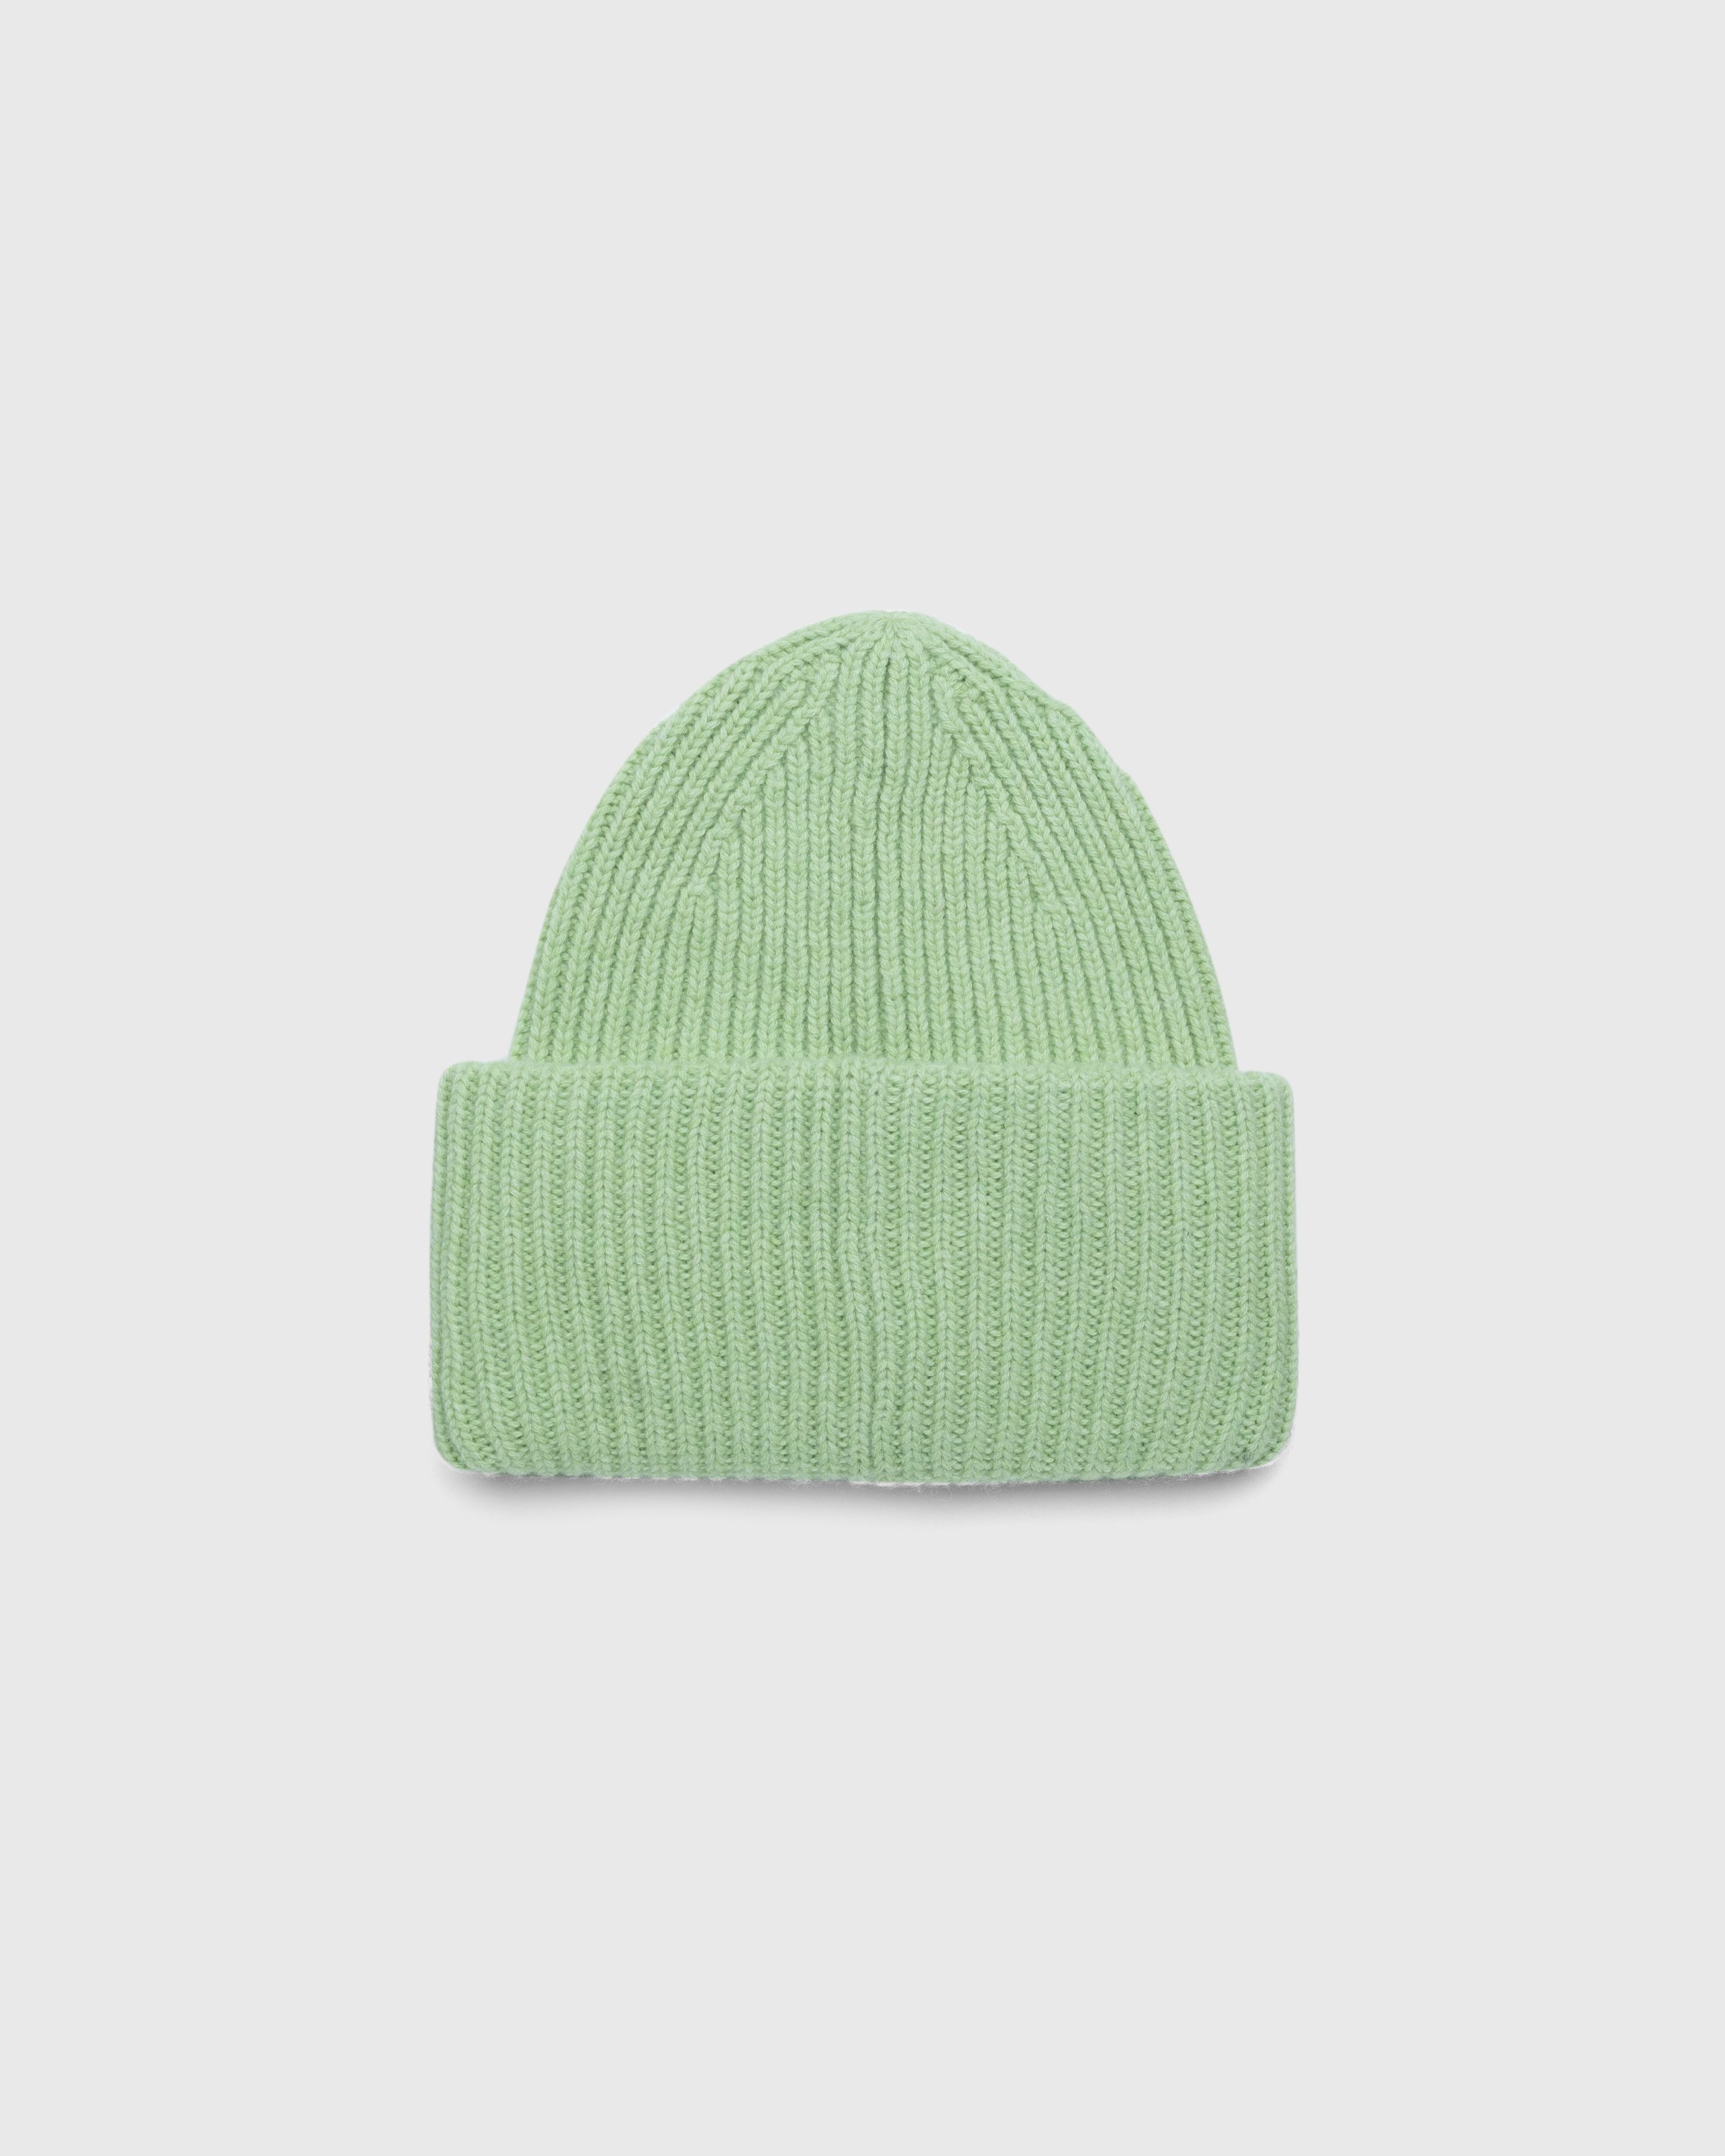 Acne Studios - Knit Face Patch Beanie Pale Green - Accessories - Green - Image 2